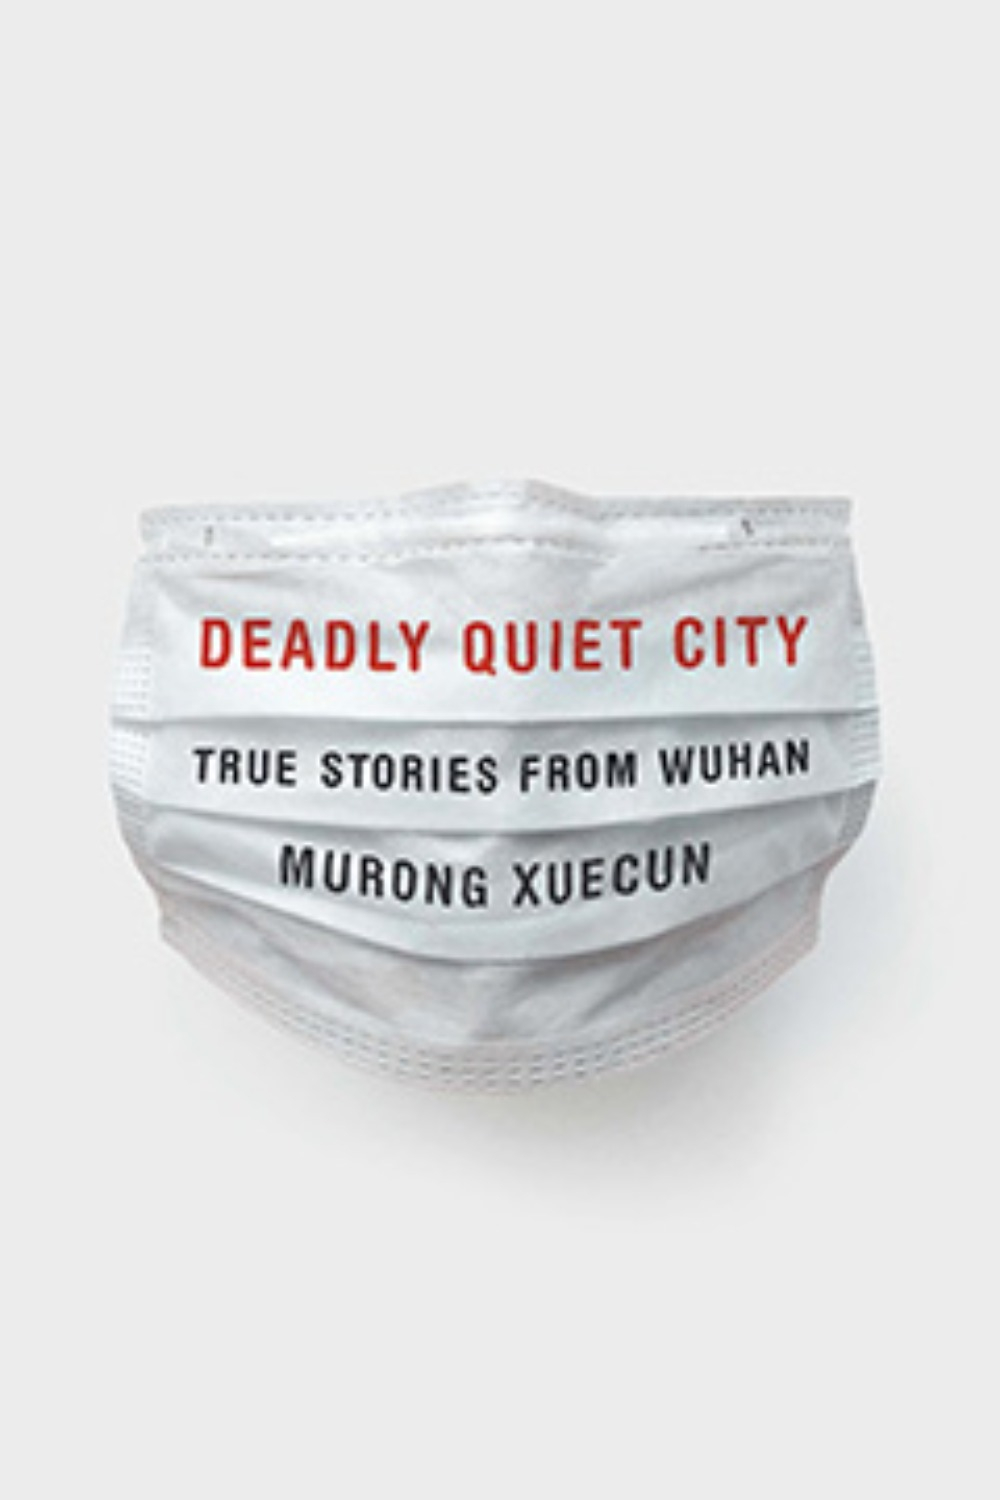 Deadly Quiet City by Murong Xuecun